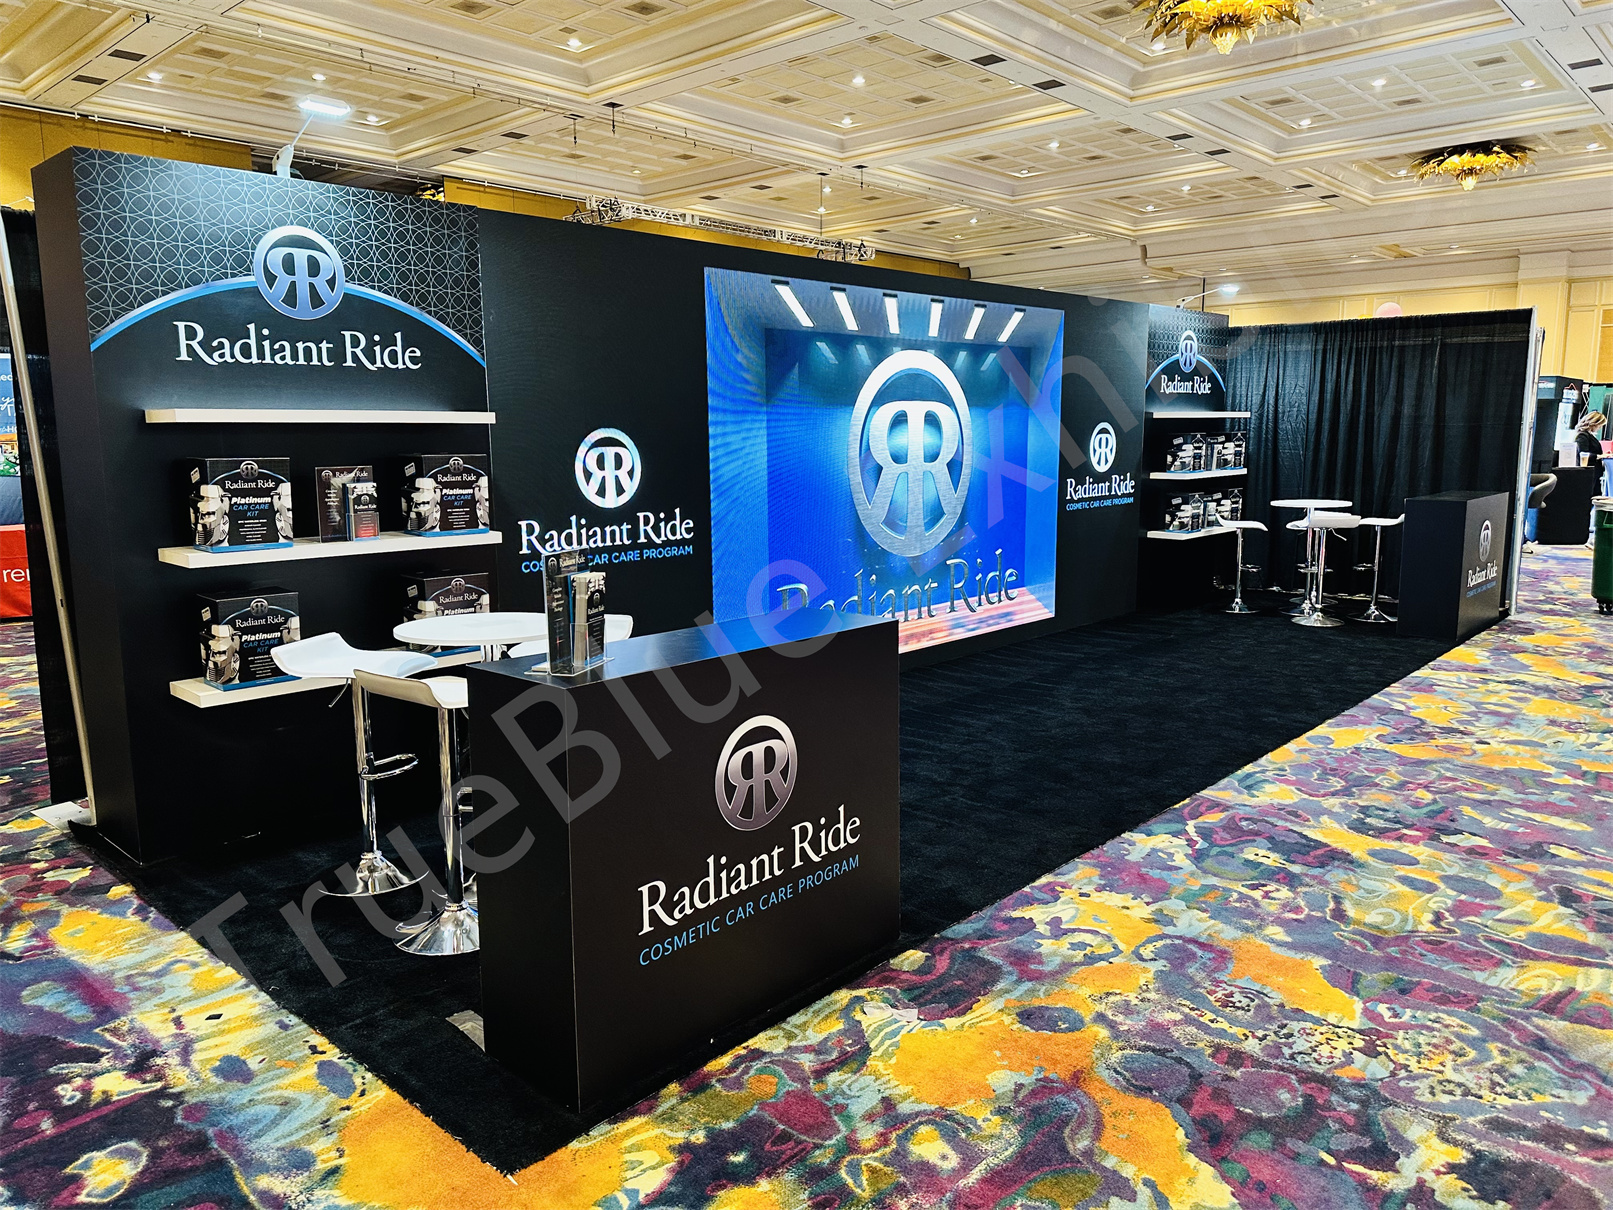 Radiant Ride Digital Dealer Conference 10′ x 30′ P3.9 LED Video Wall Booth